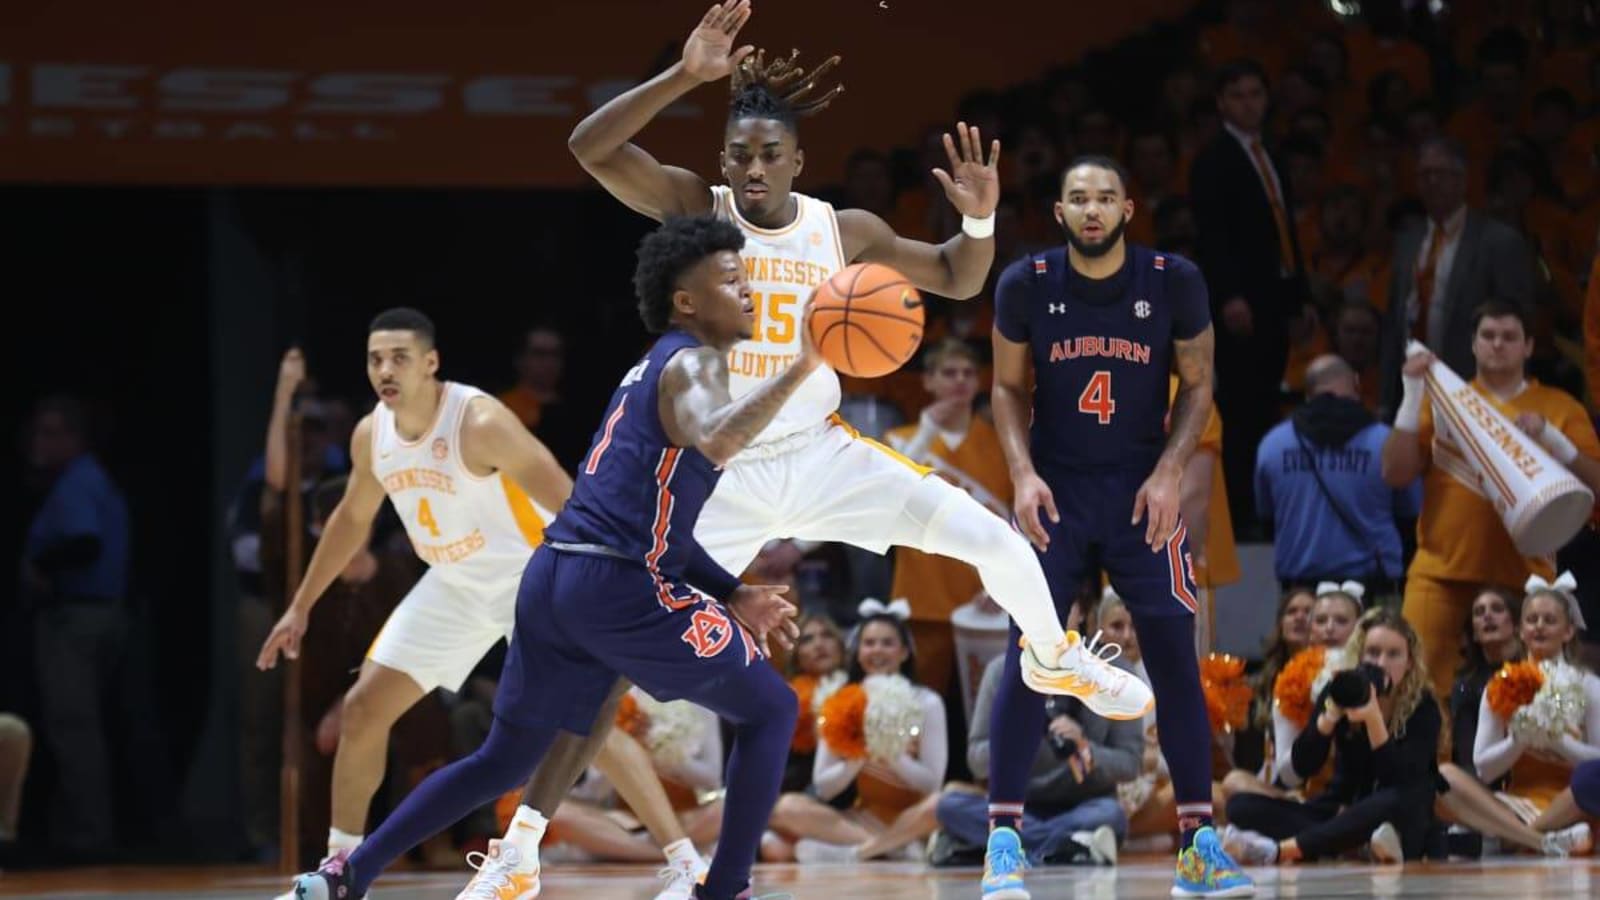 Watch: Horrendous no-call at the buzzer gives No. 25 Auburn loss at No. 2 Tennessee